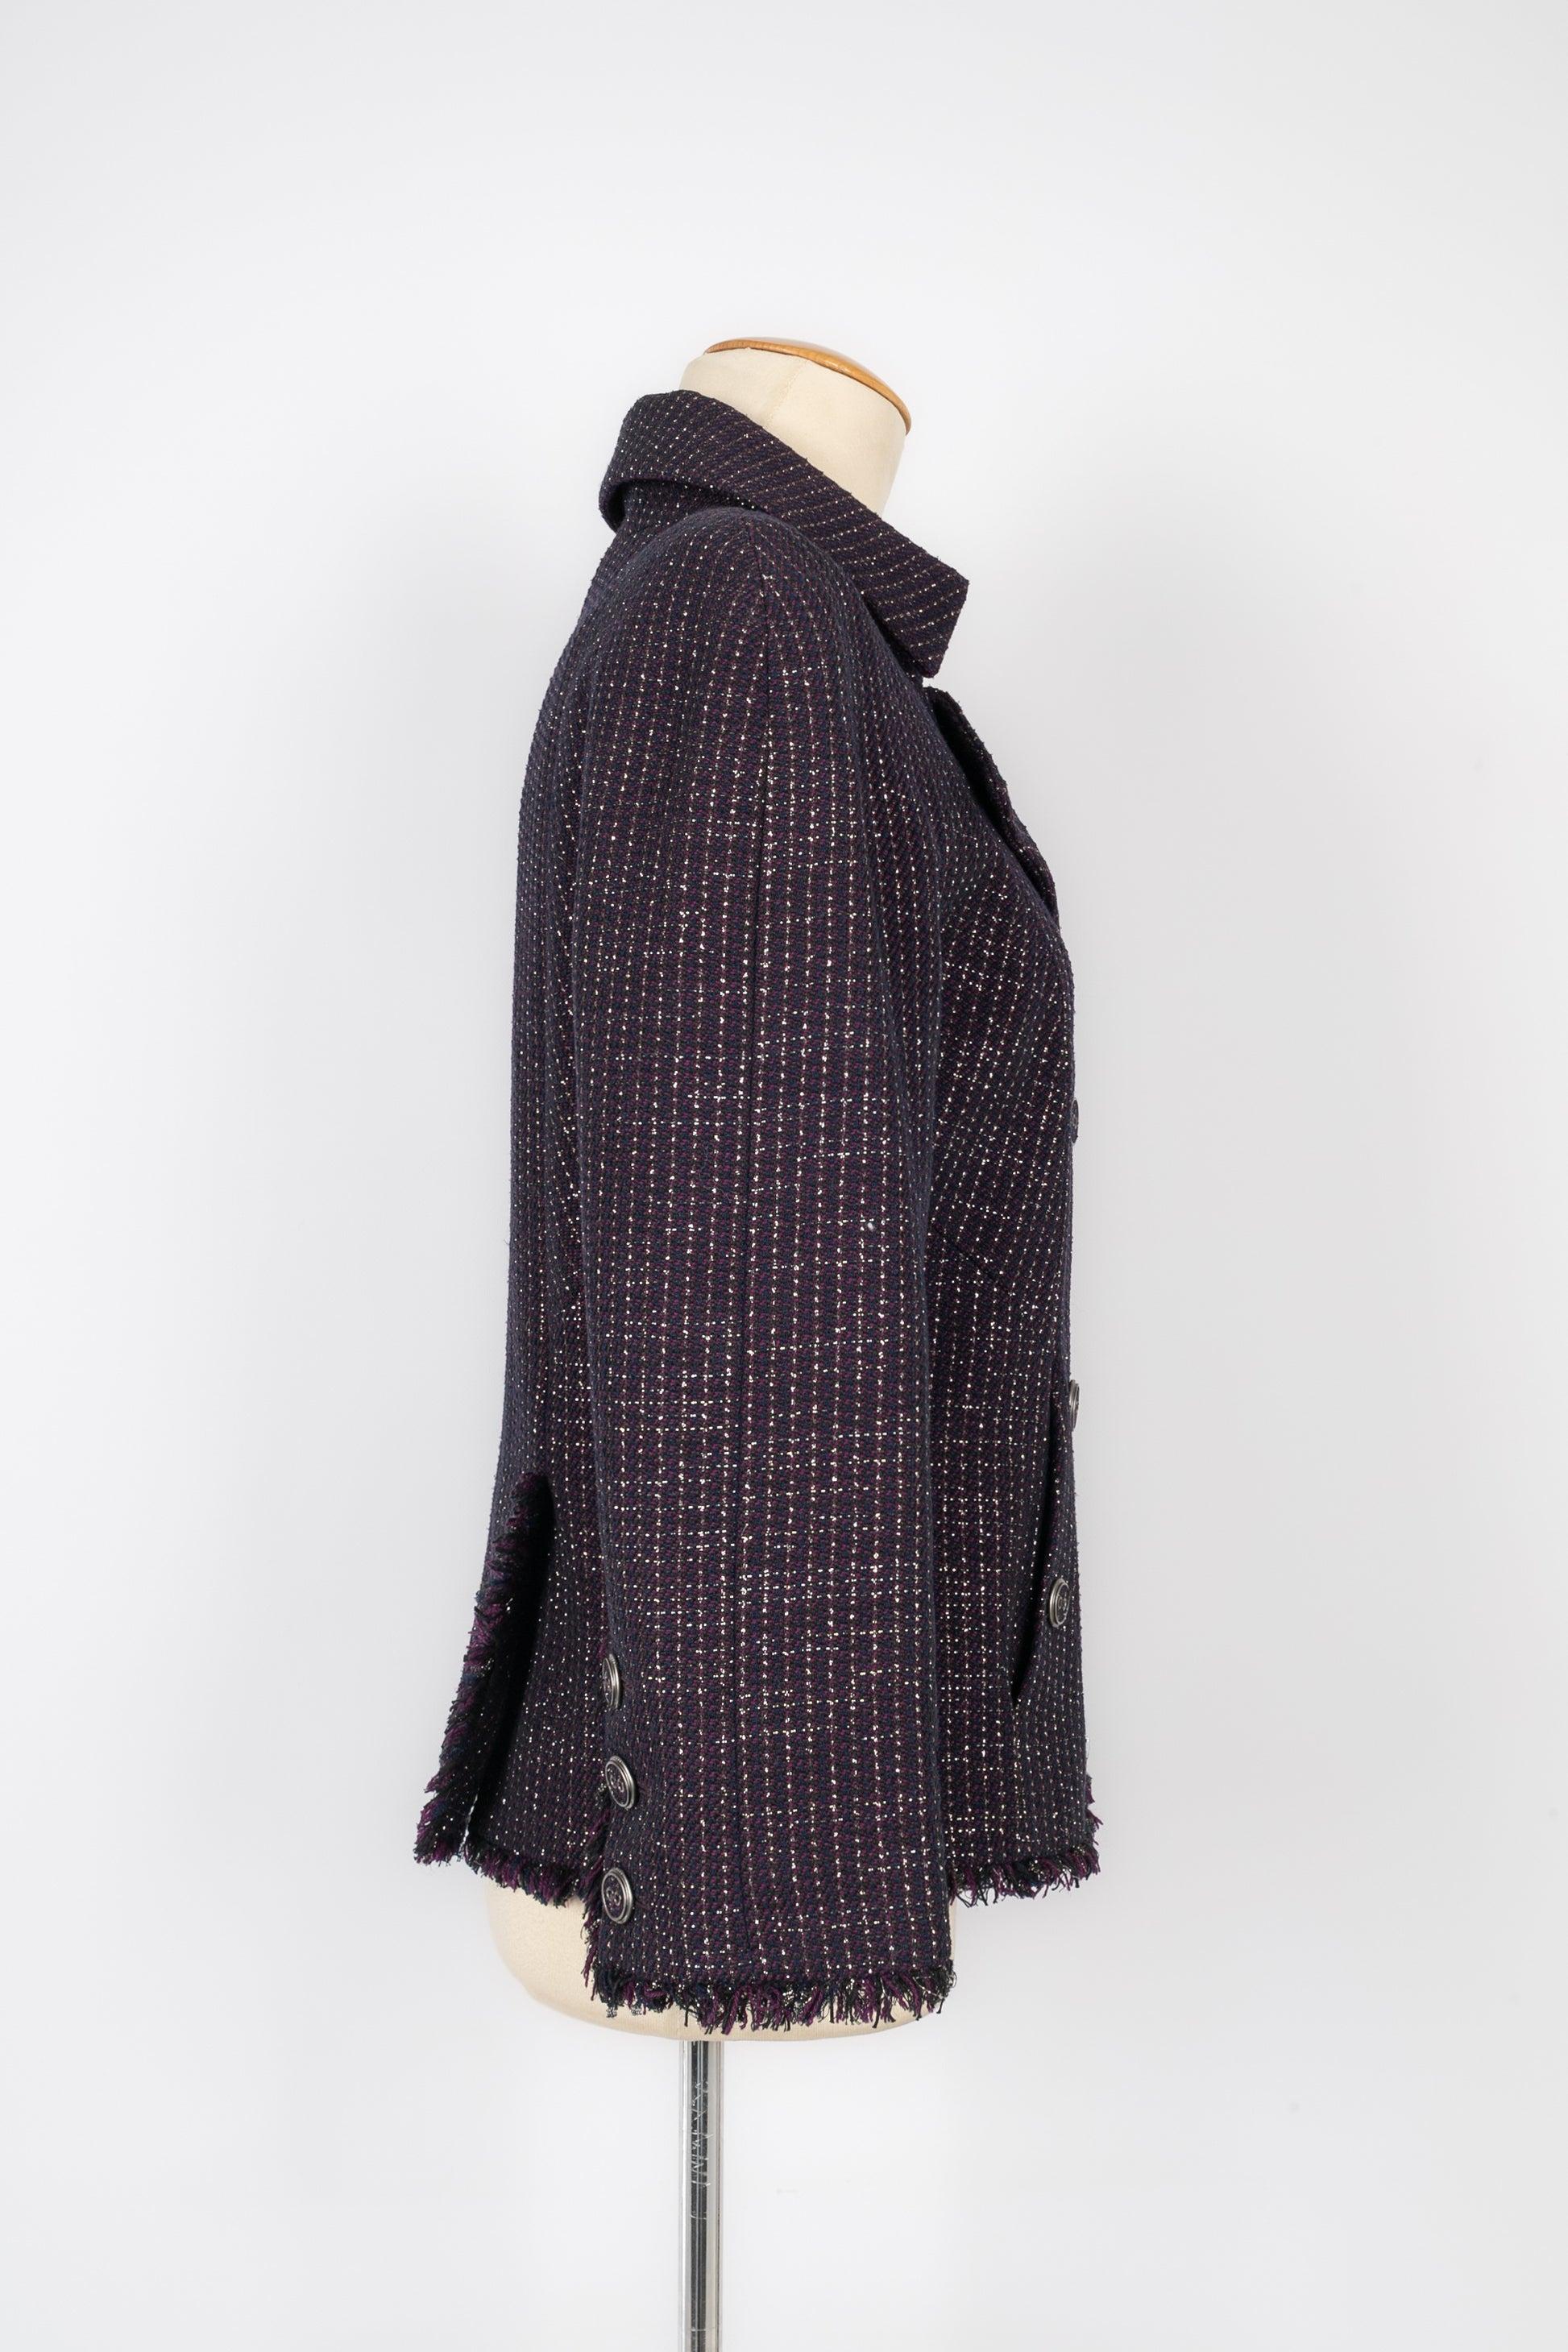 Women's Chanel Blended Wool and Cotton Jacket Spring, 2008 For Sale